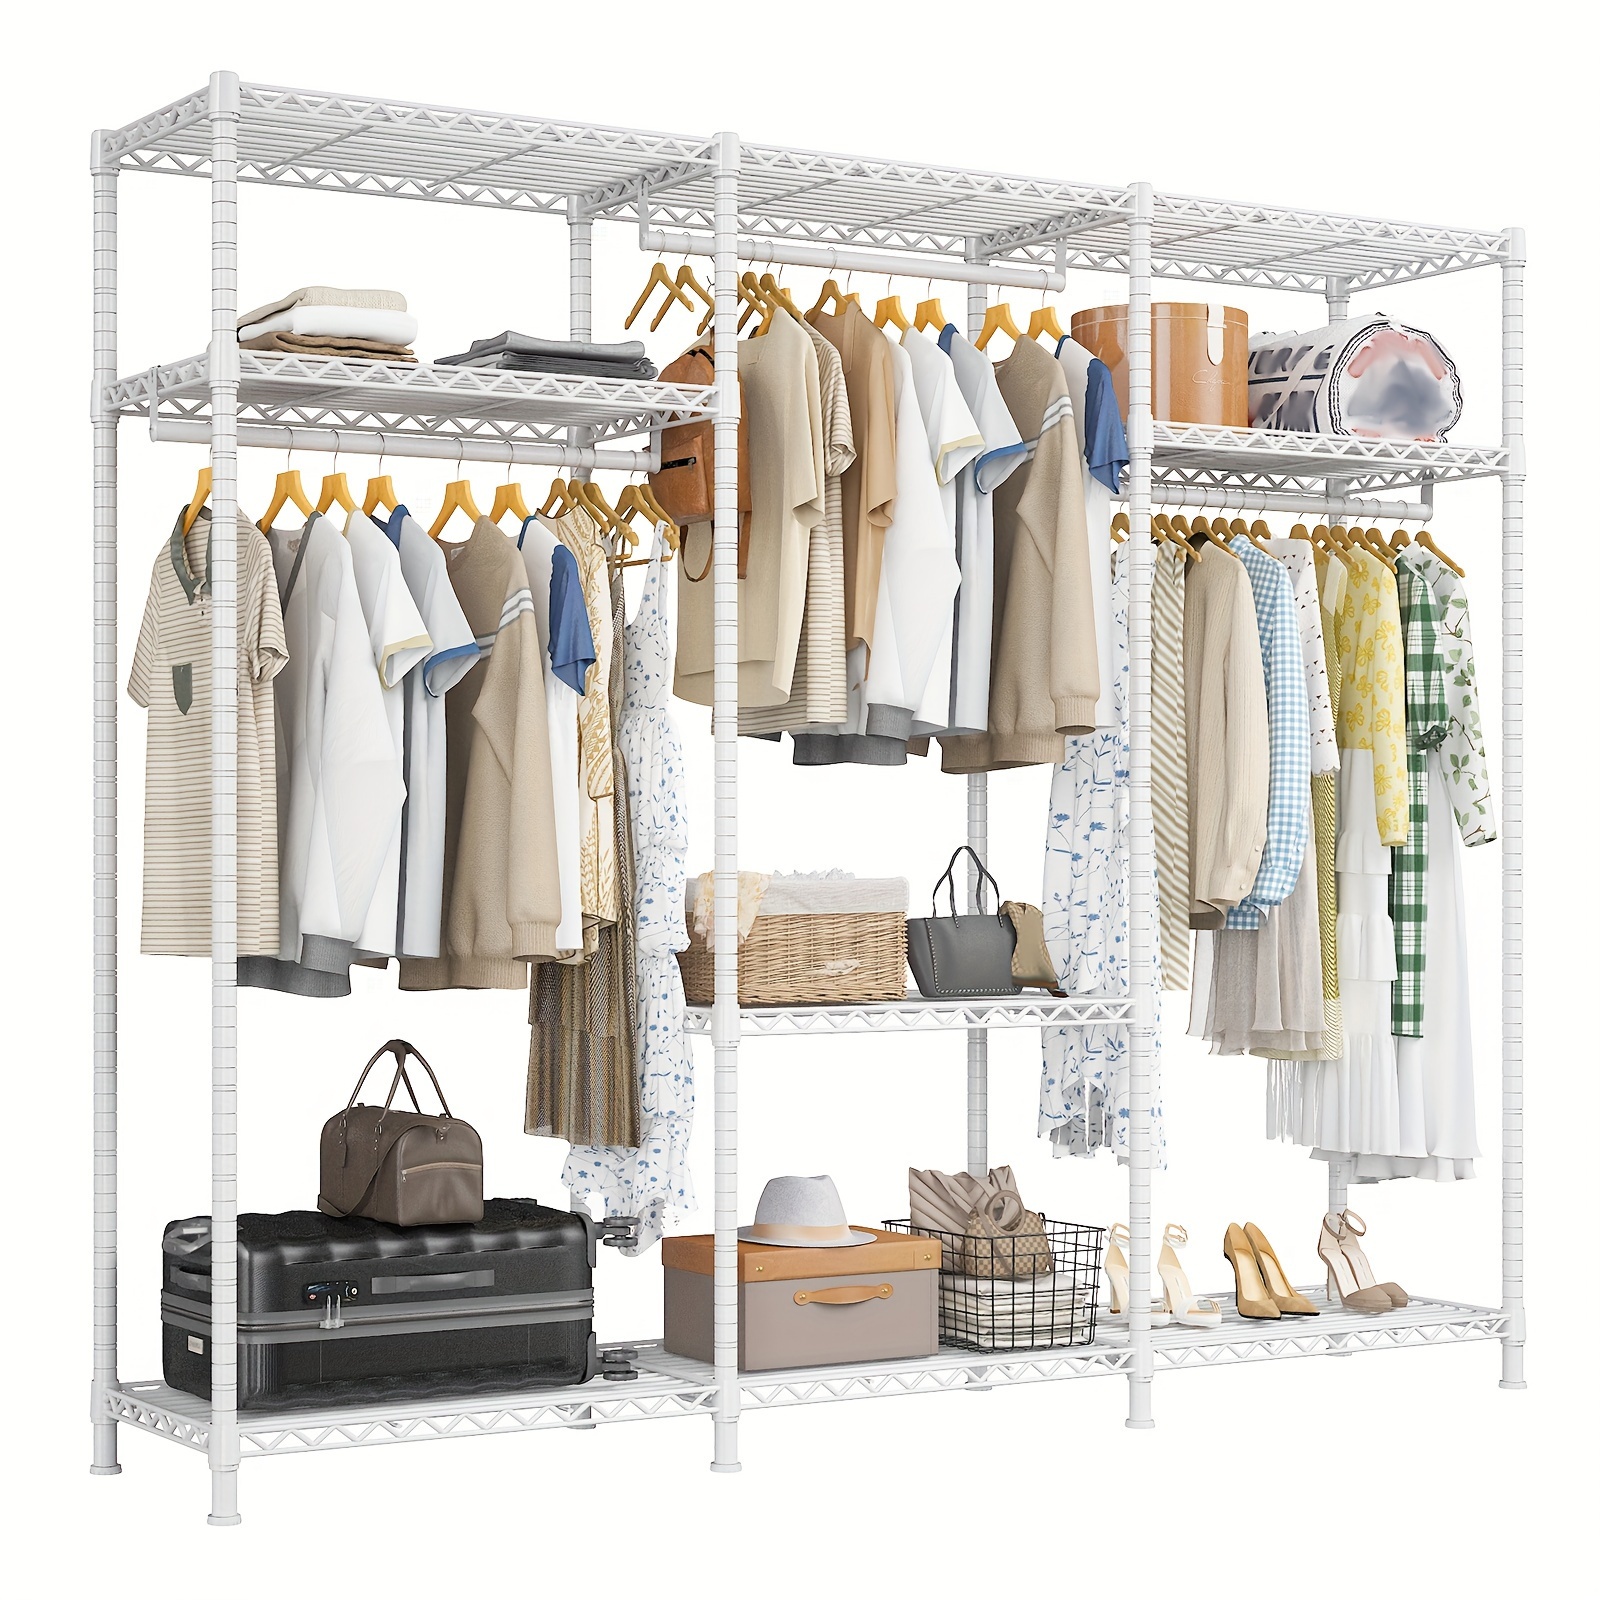 

Clothes Rack Heavy Duty 795lbs Clothing Racks For Hanging Clothes Adjustable Wardrobe Closet Portable Garment Rackfree Standing Closet, White